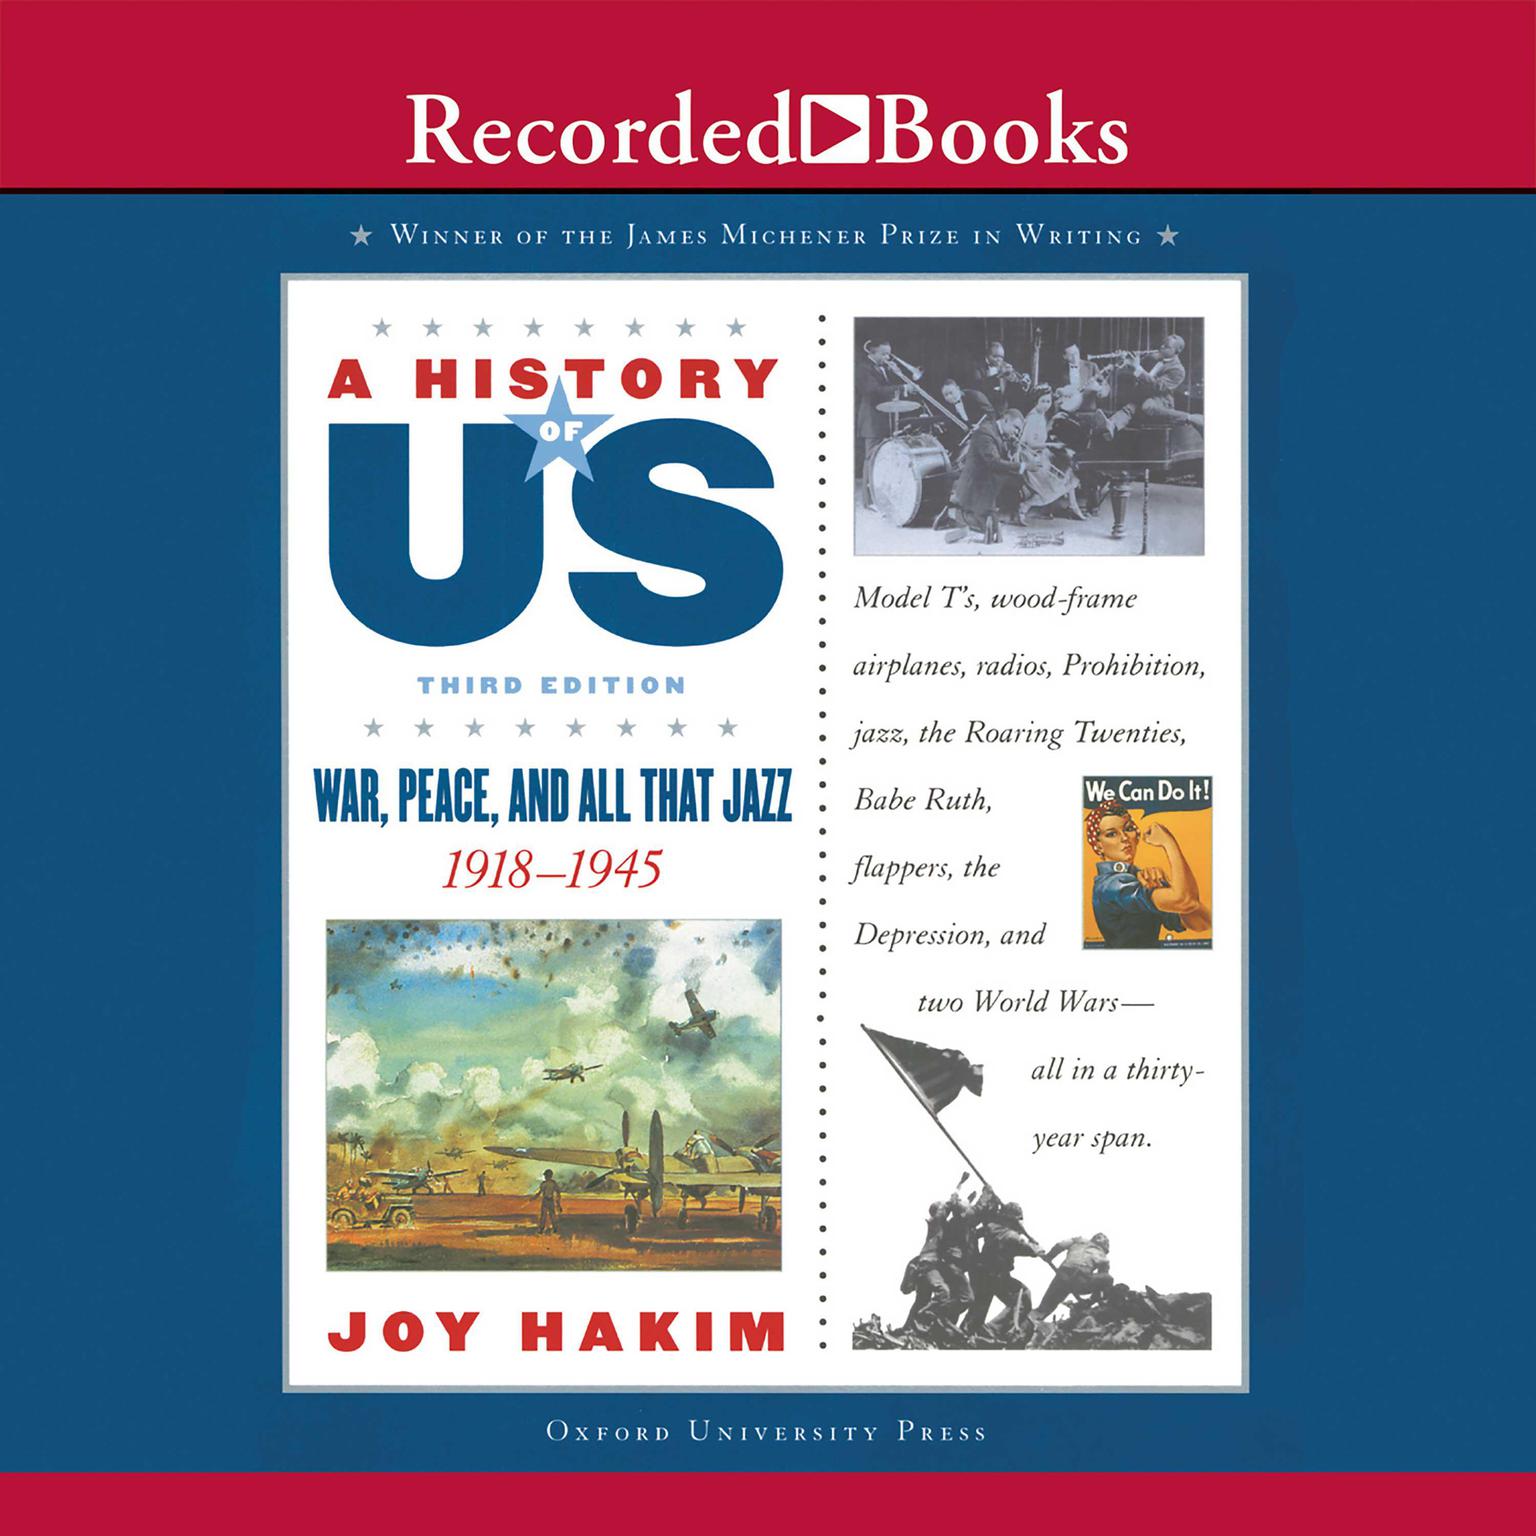 War, Peace, & All That Jazz: Book 9 (1918-1945) Audiobook, by Joy Hakim